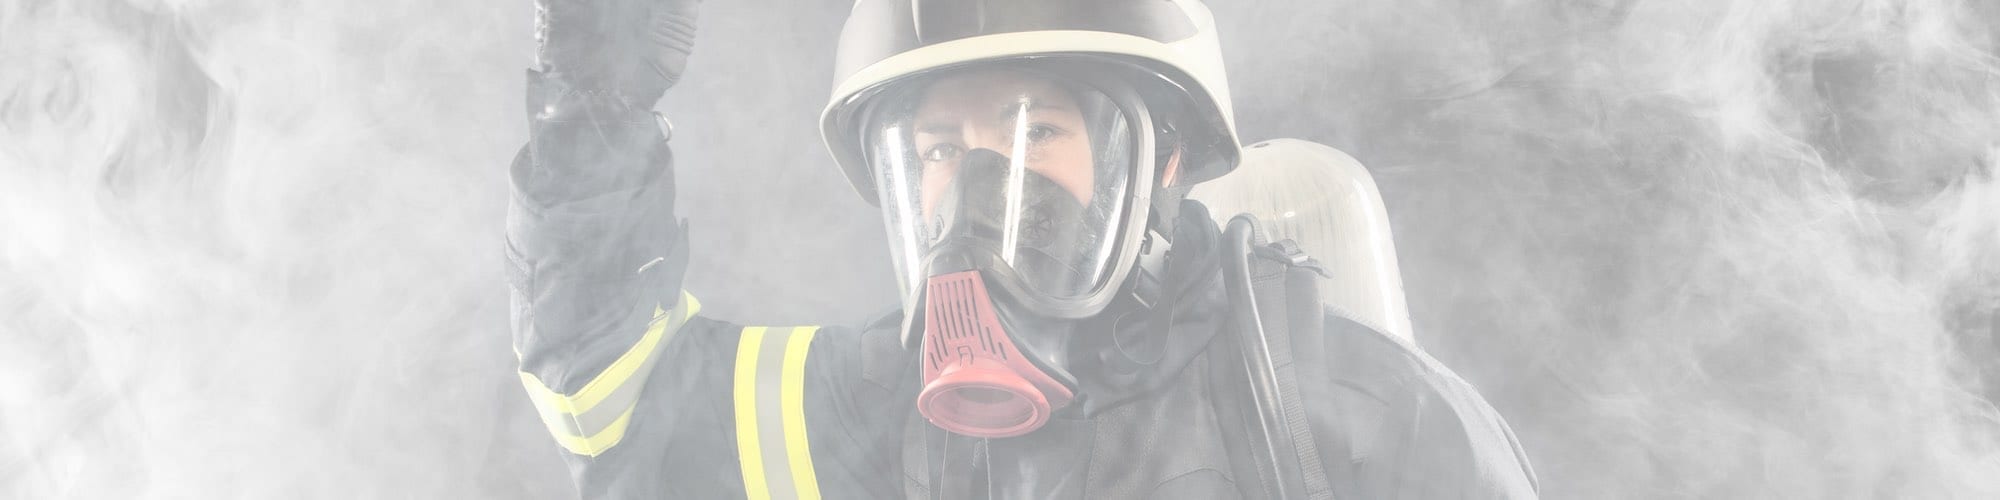 9 Things Your Respiratory Protection Program Must Include